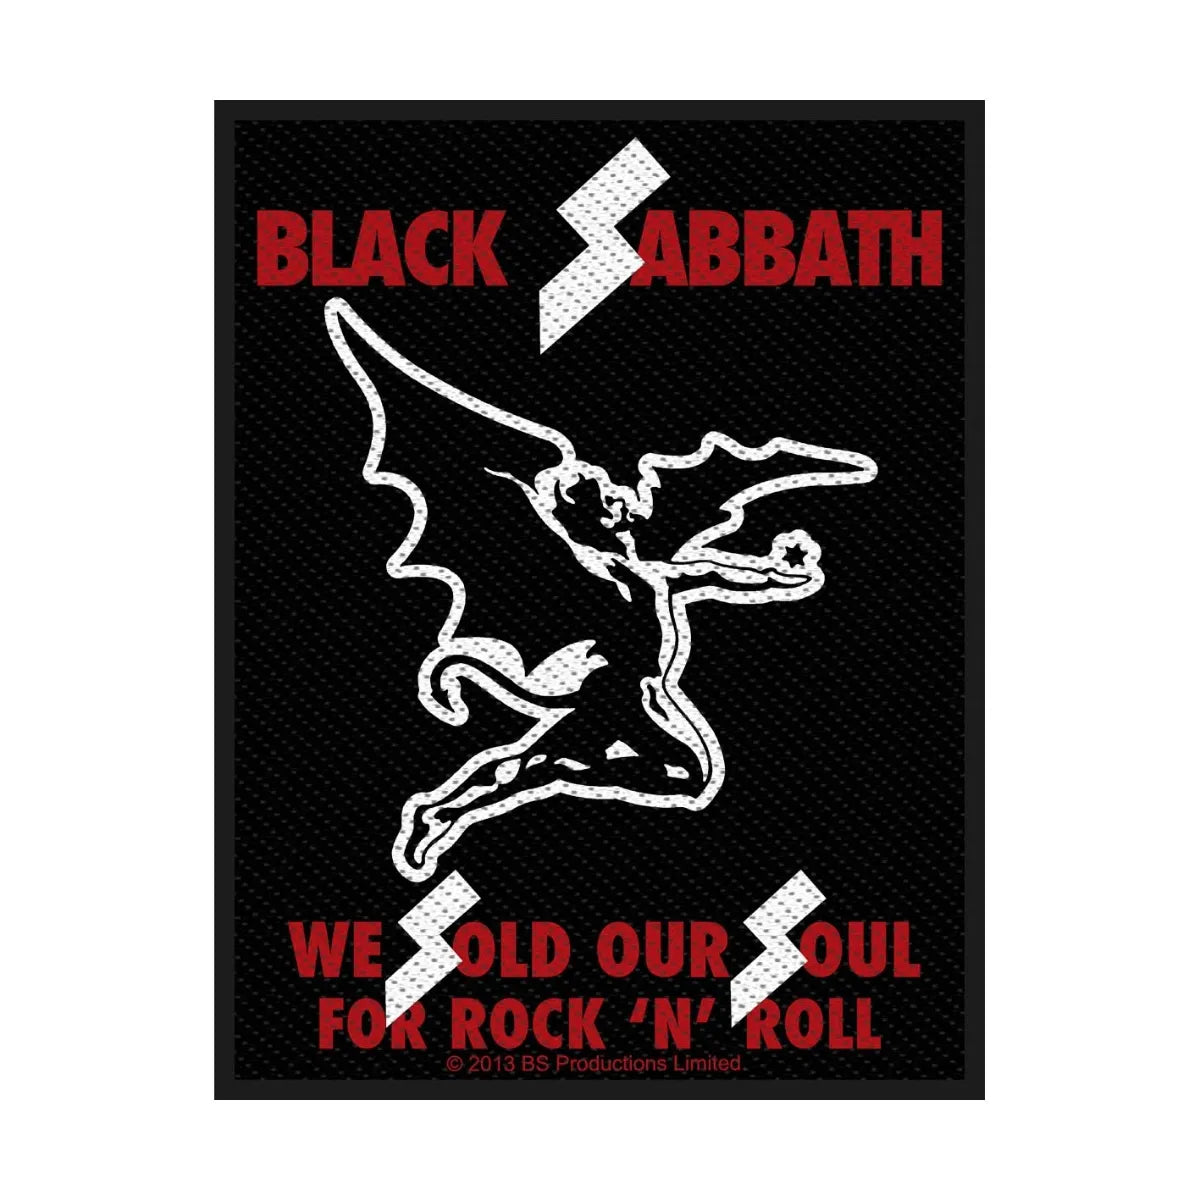 Black Sabbath - We Sold Our Souls For Rock 'n' Roll - Patch